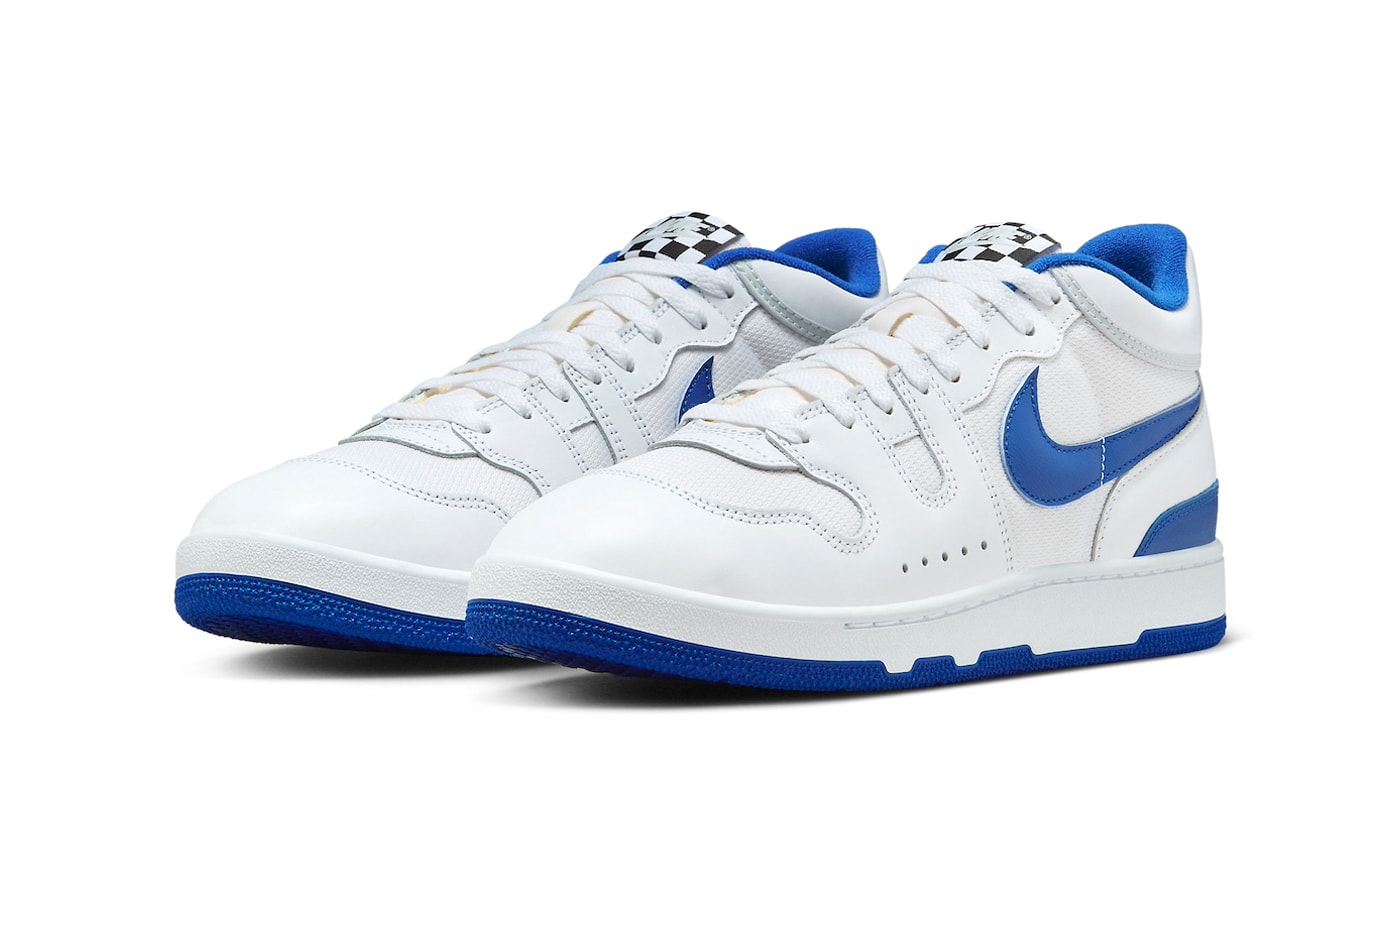 Nike Mac Attack Gets a Classic Treatment in "Game Royal" White/Game Royal-Pure Platinum-Black FB1447-100